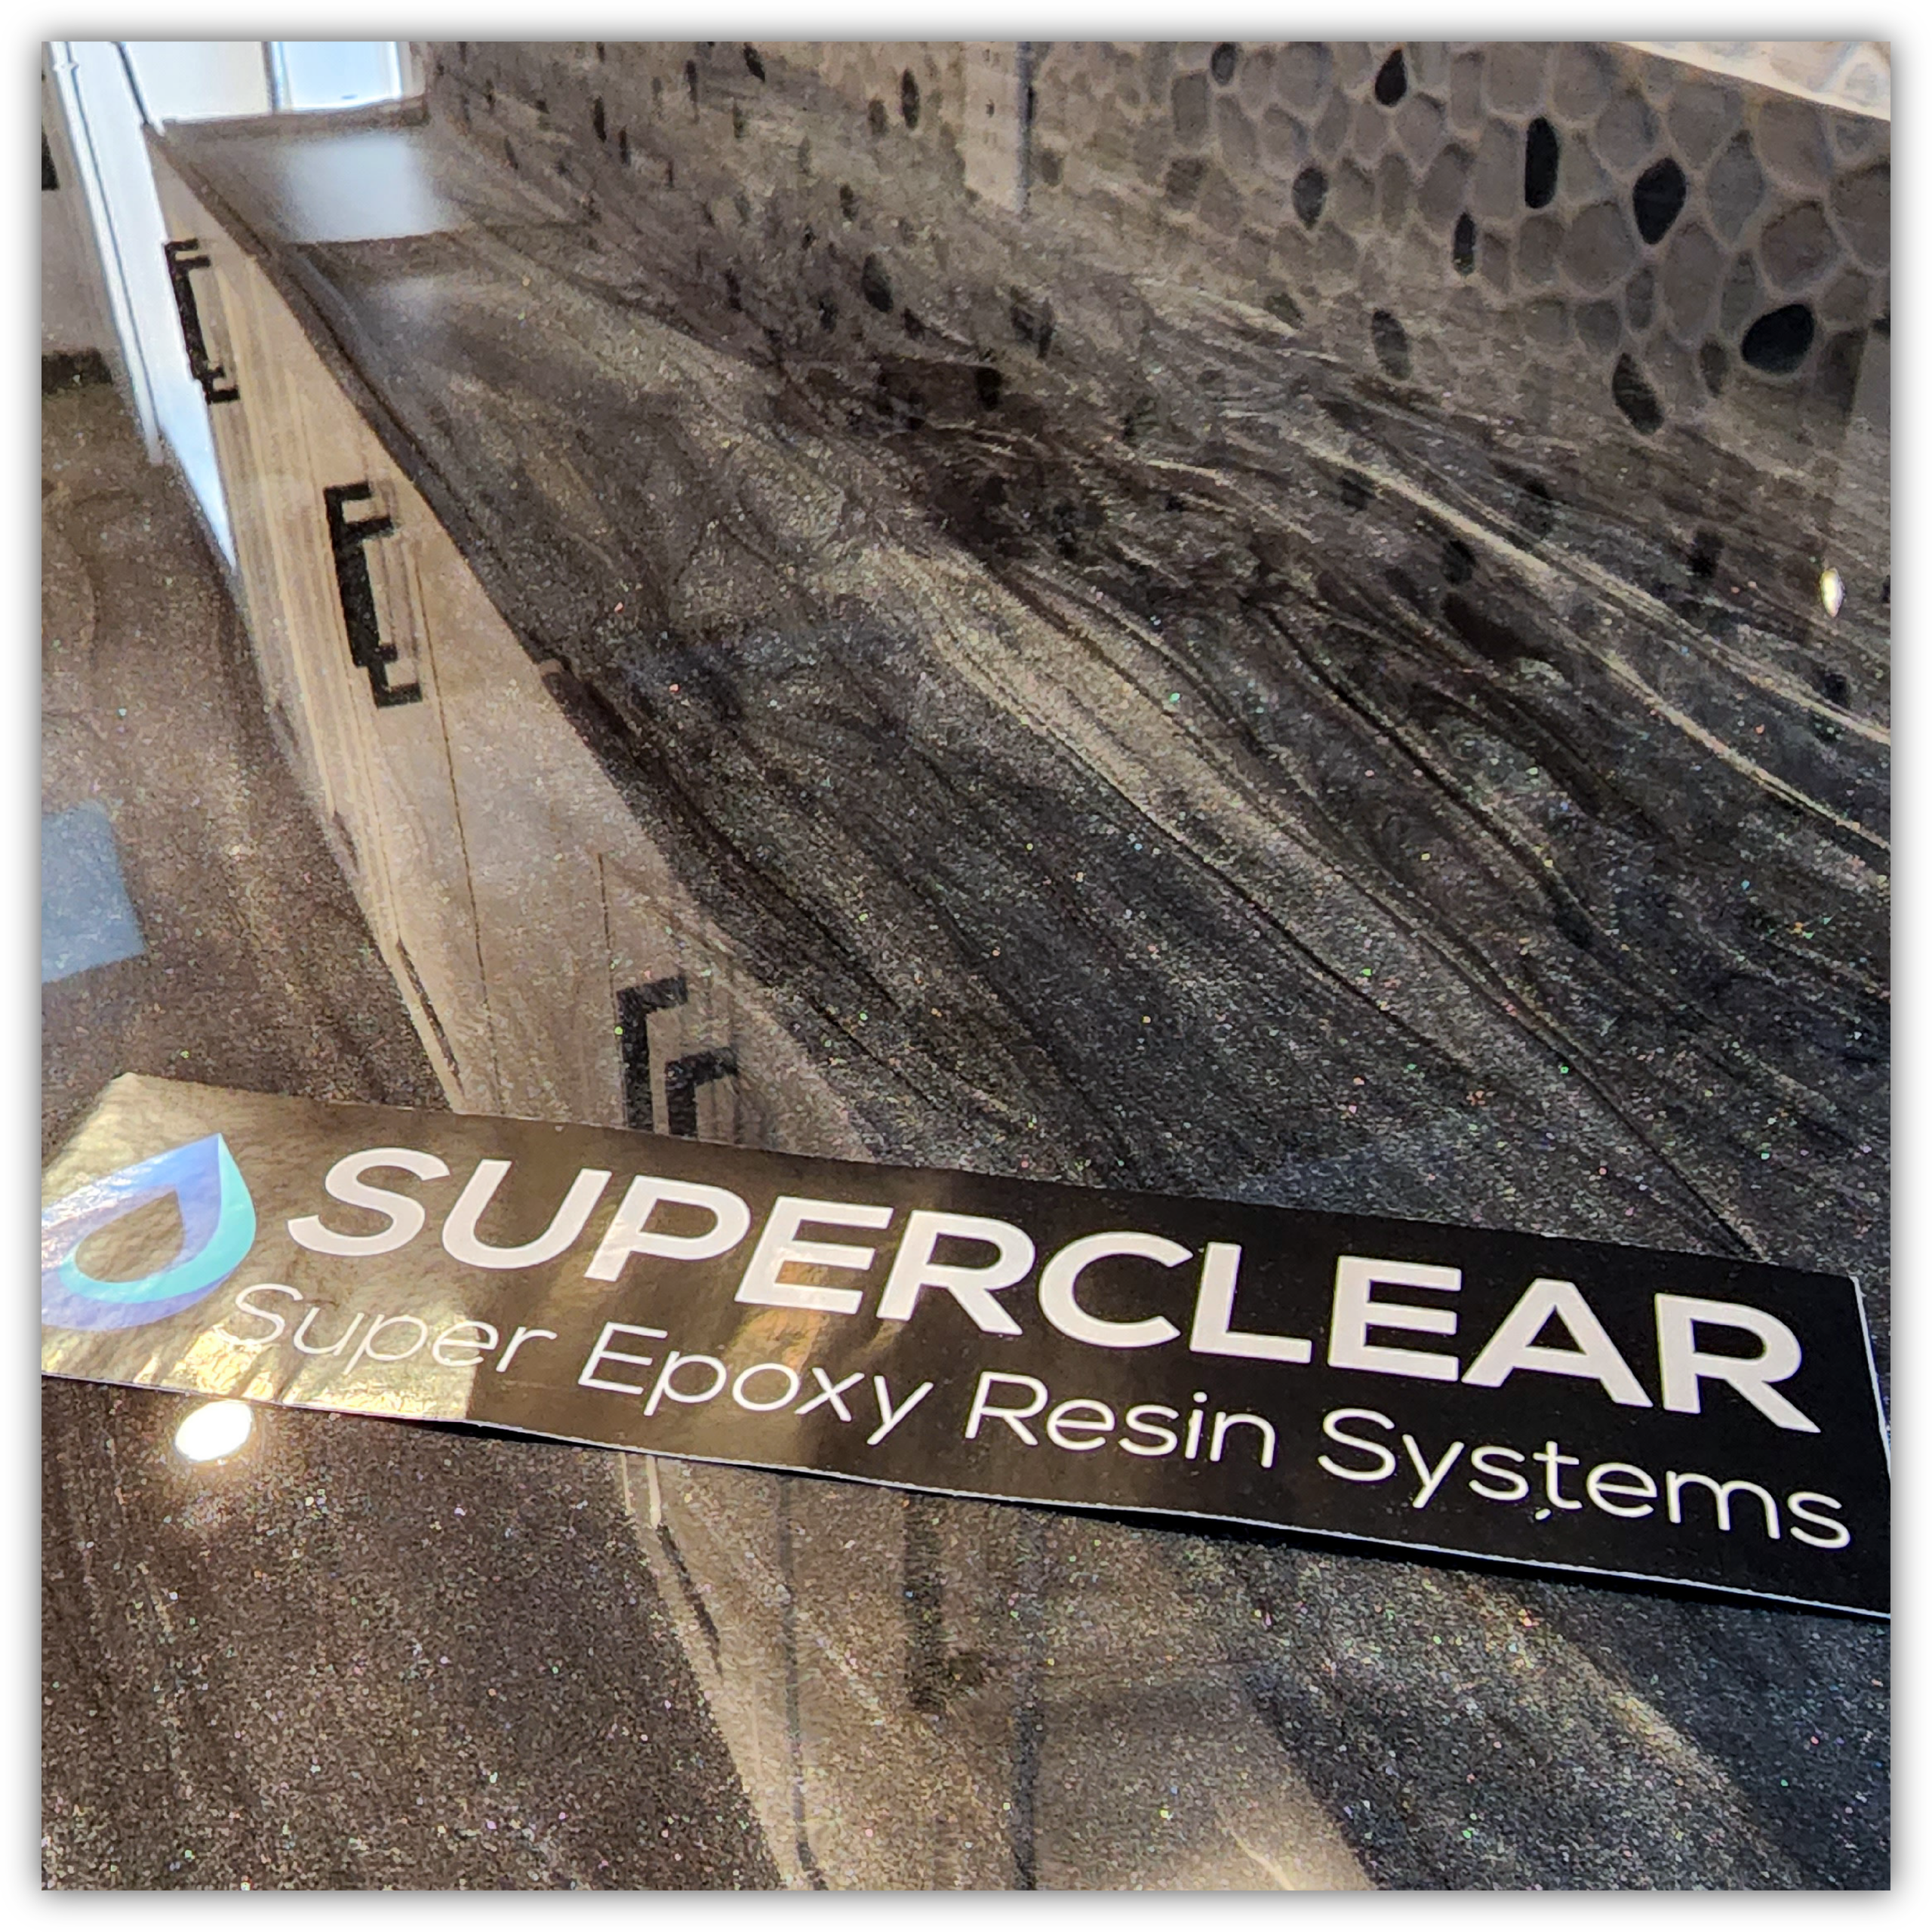 Superclear Countertop Epoxy Resin, 1.5 Gallon 2-Part Epoxy Kit - Certified  Food Grade 2:1 Protective Epoxy Resin for Kitchen & Bathroom Counter Tops,  Tables & Wood Slabs - DIY Friendly: : Industrial & Scientific